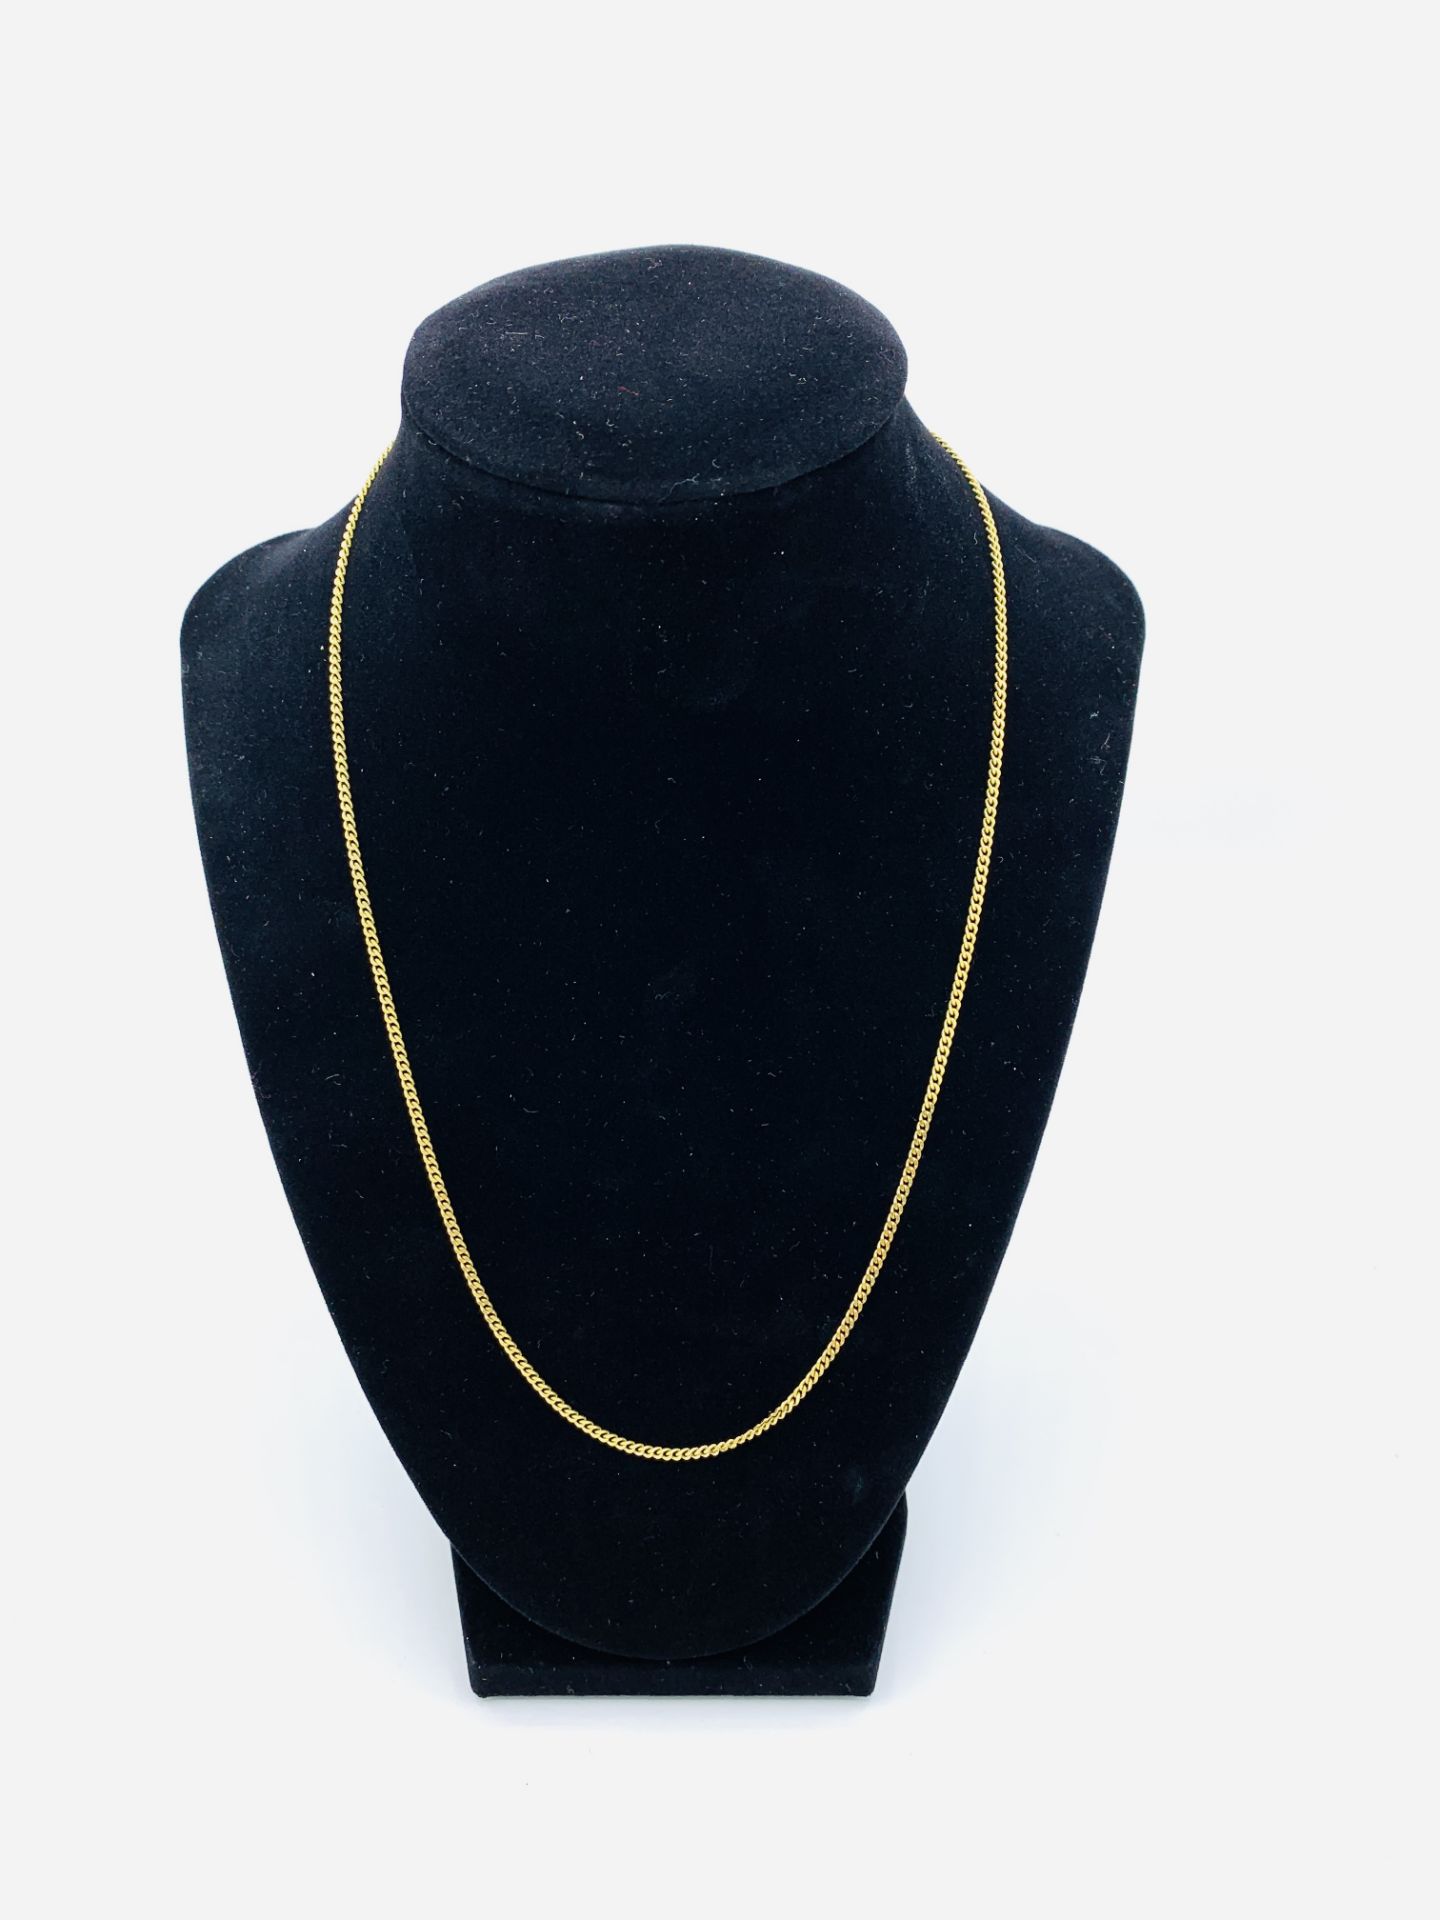 9ct gold flat chain necklace. - Image 3 of 5